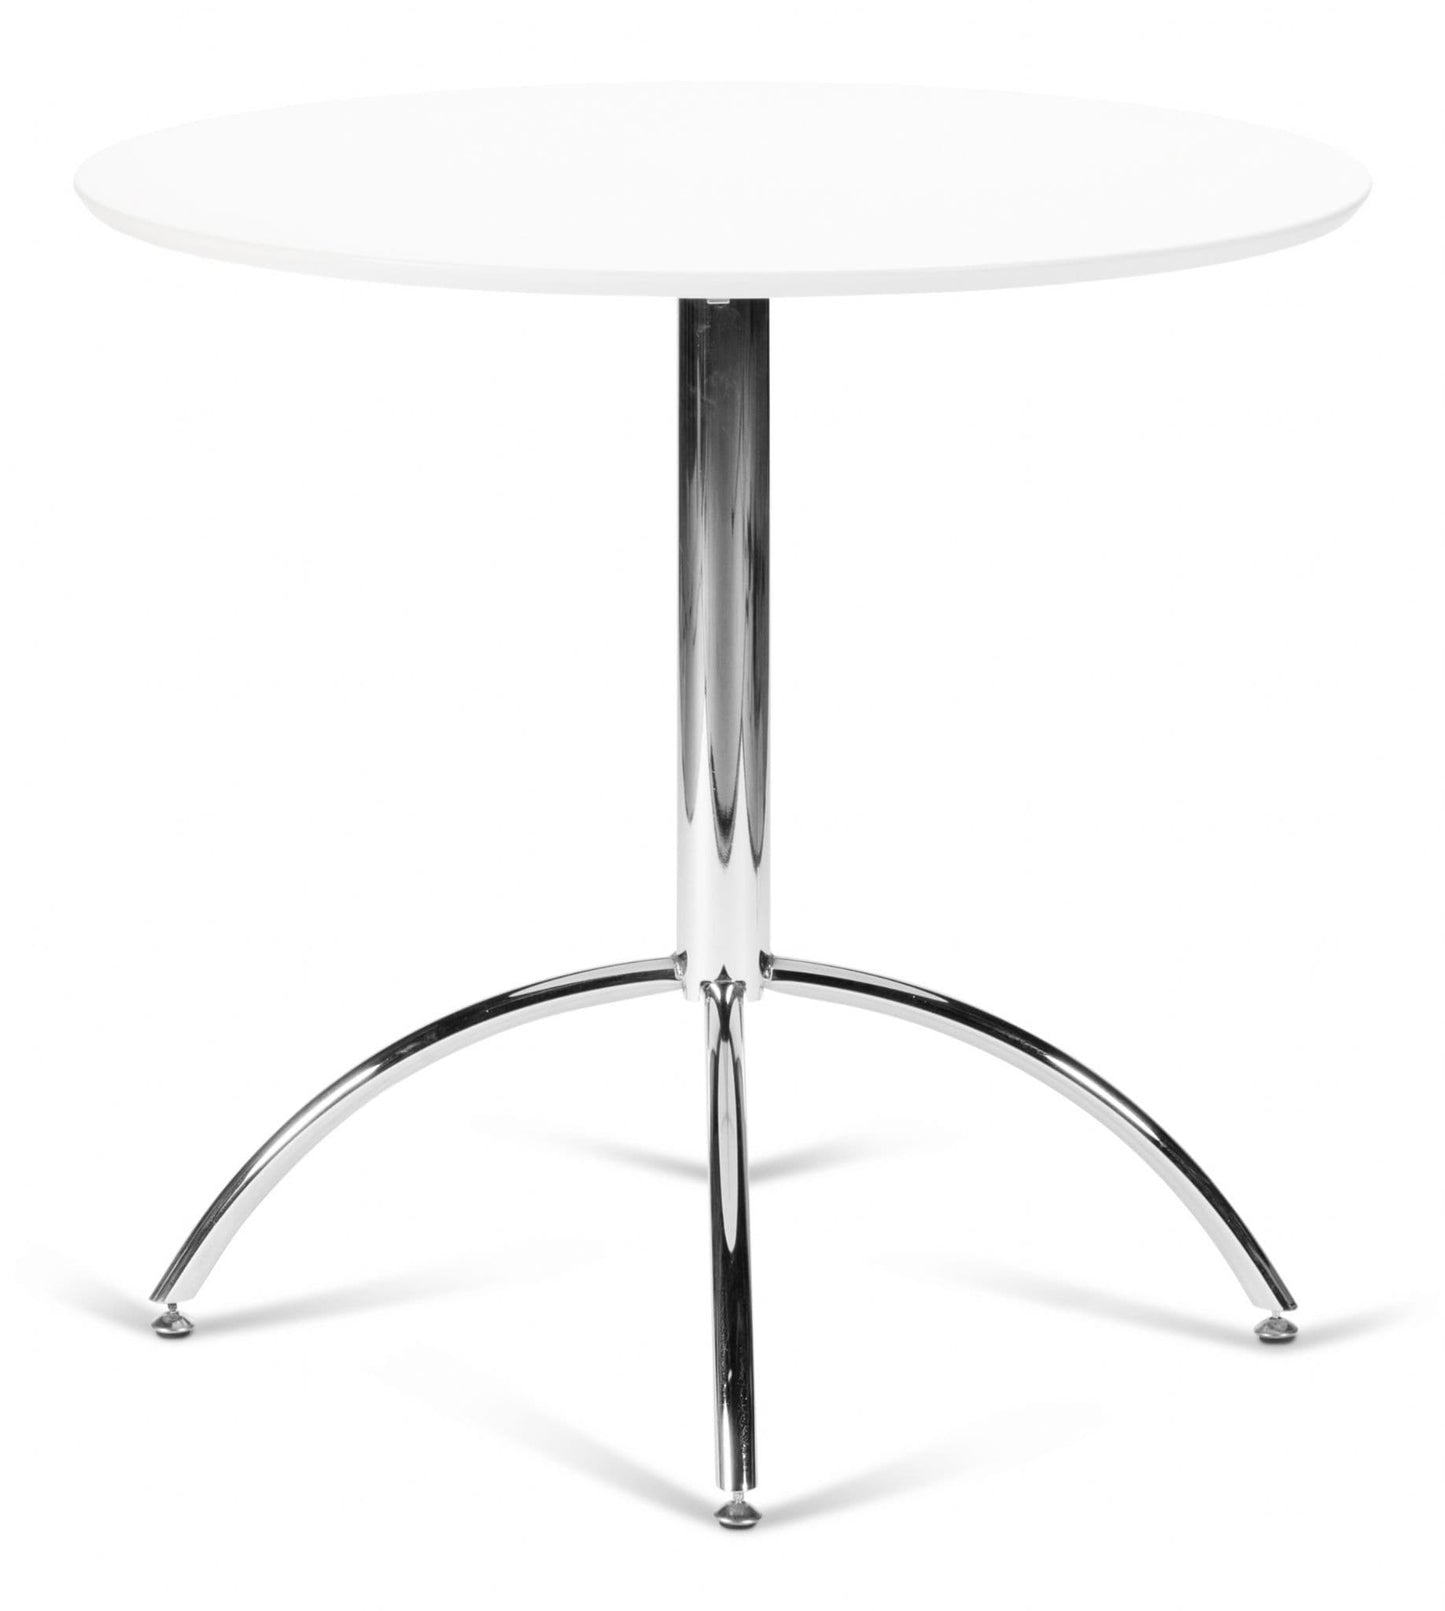 Kimberley Dining Set White Table & 4 Black Chairs - Kimberley White Table